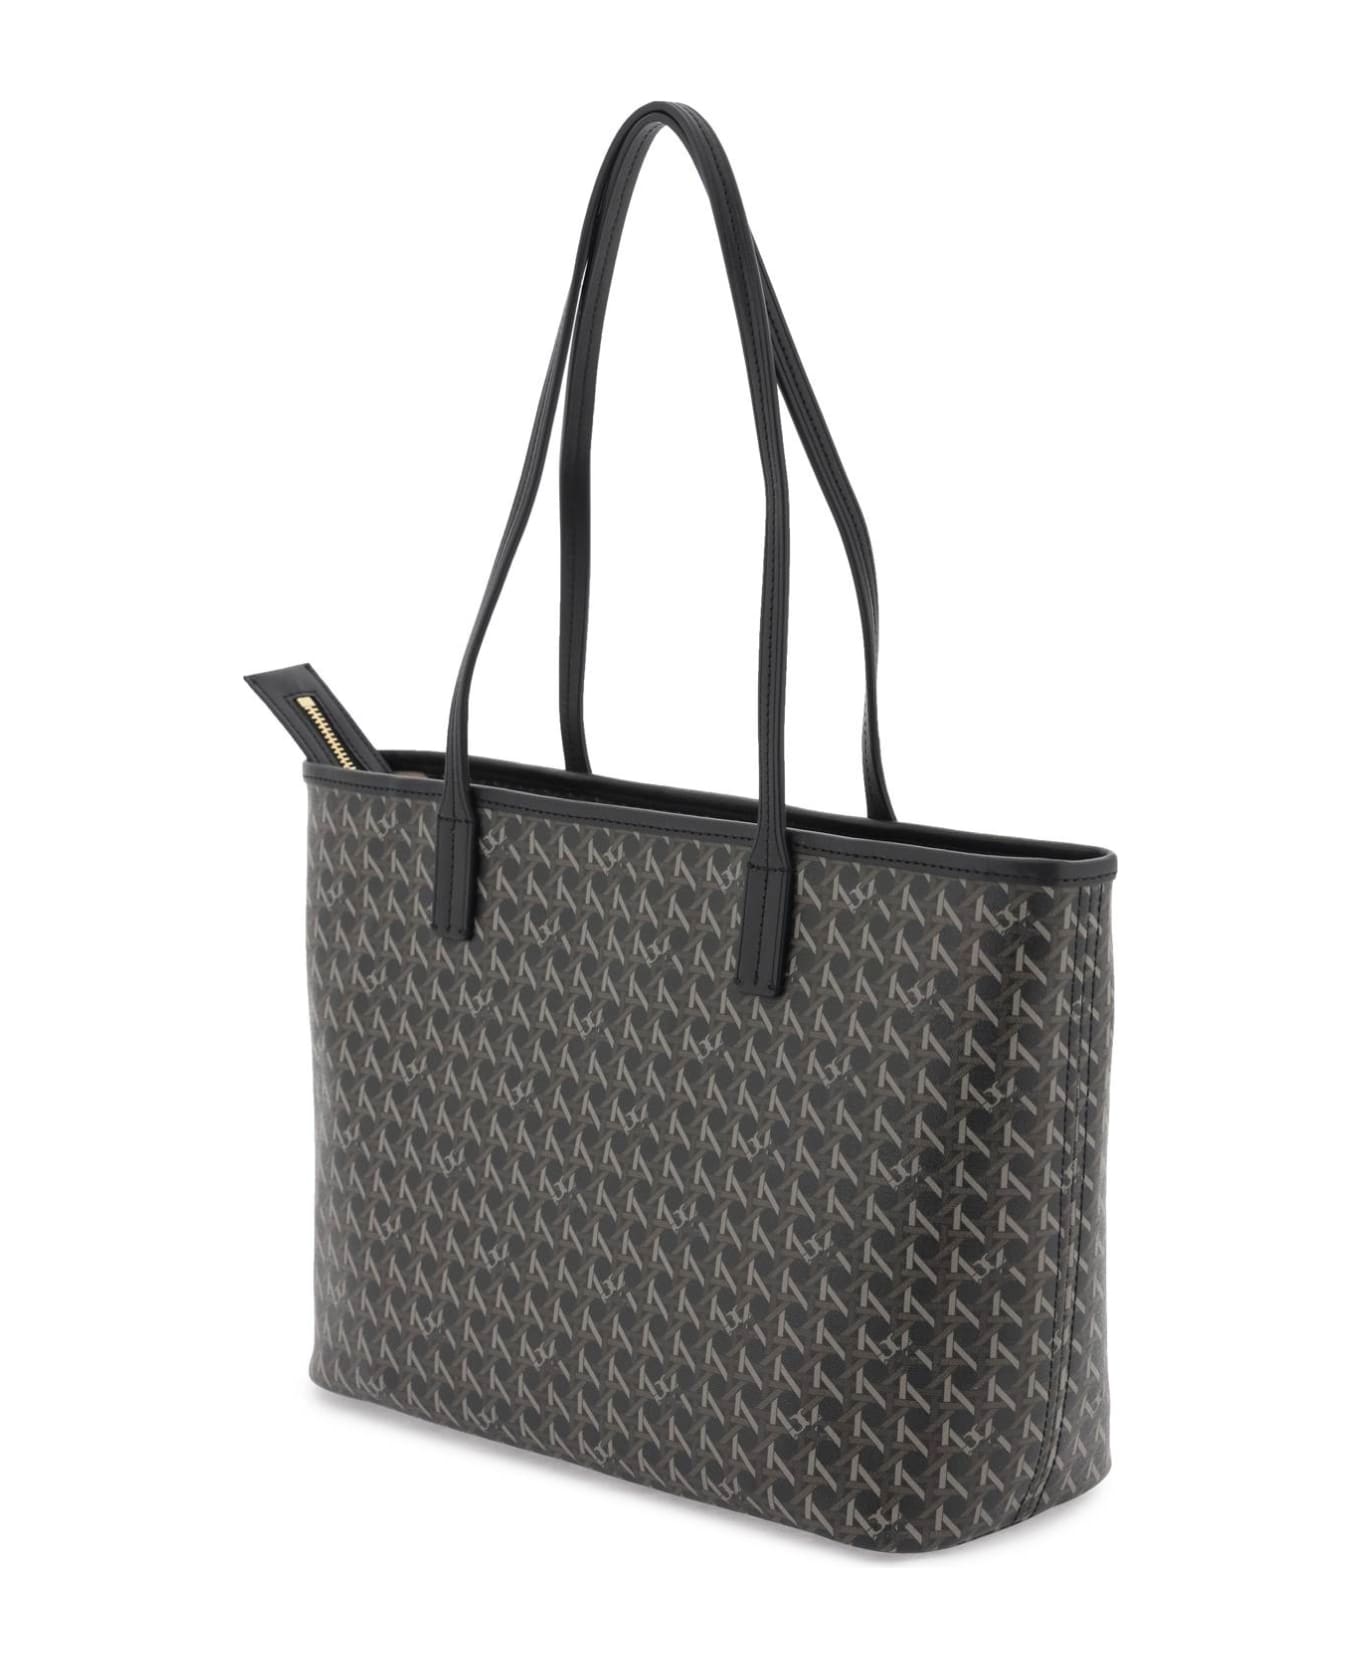 Tory Burch Ever-ready Small Tote Bag - Black トートバッグ